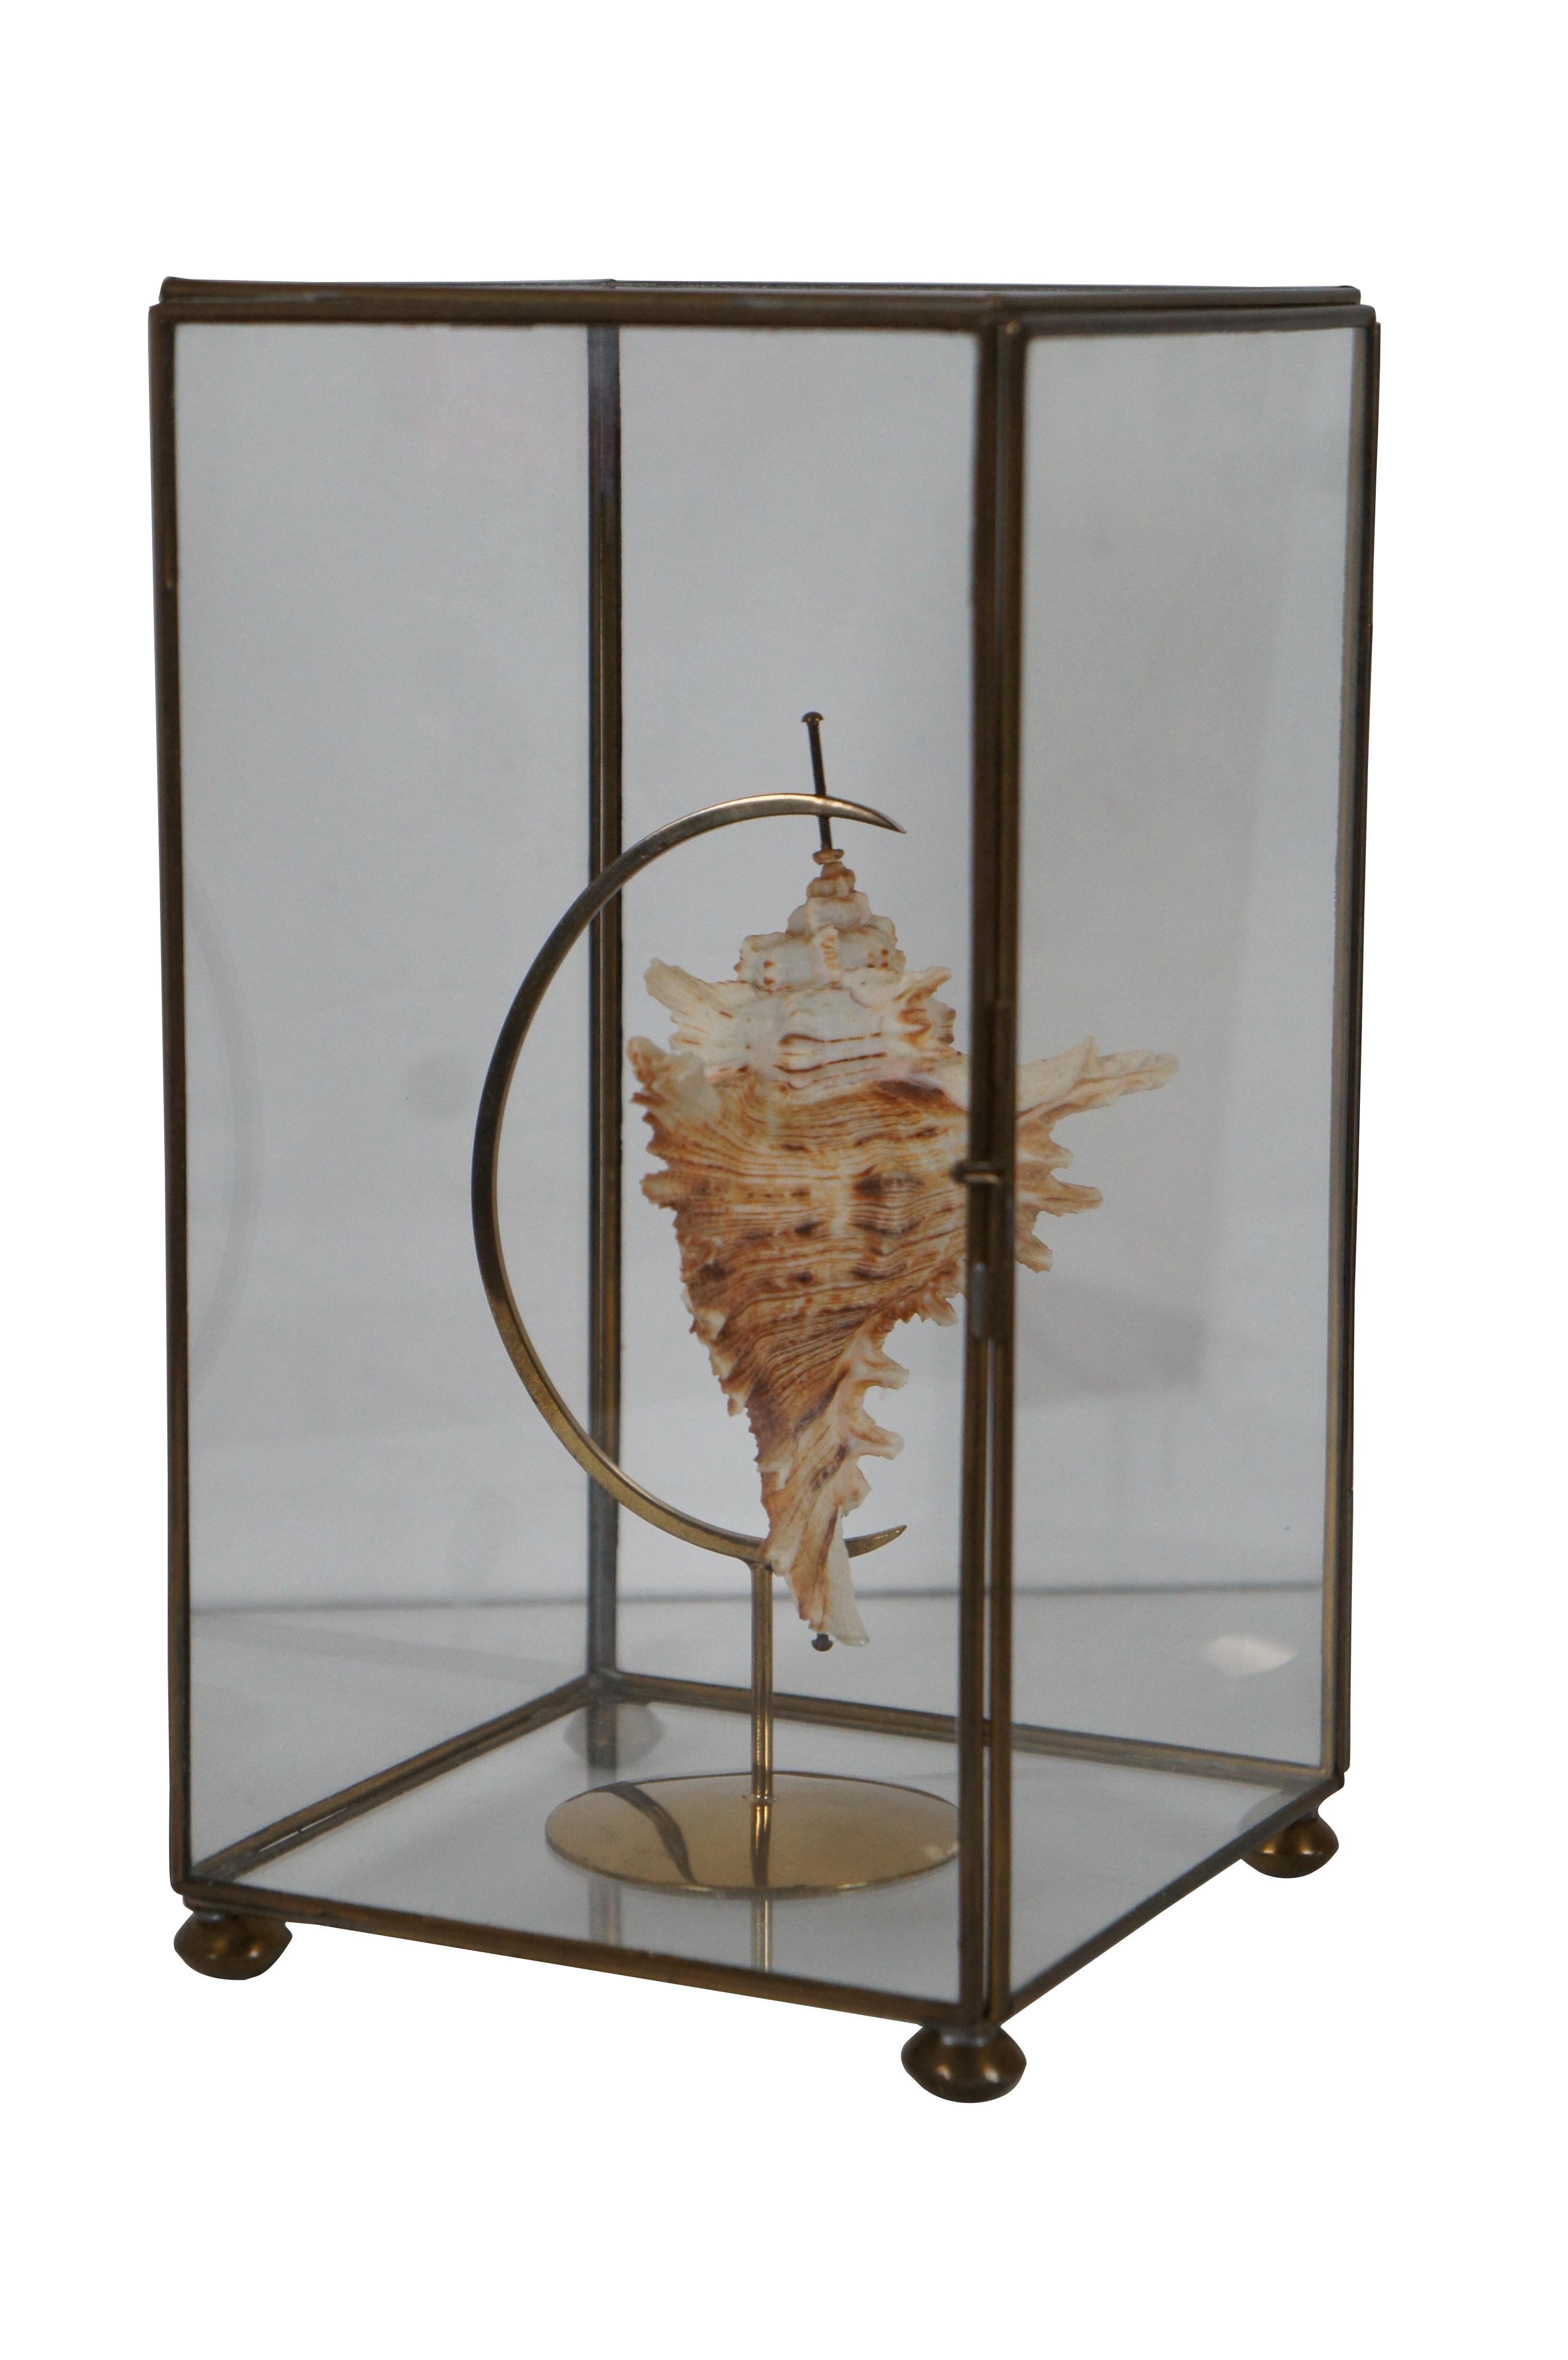 Vintage brass and glass display case / casket containing an ivory and copper colored spiked conch shell on a brass crescent stand. 

Crescent stand is labeled for an Ancilla velesiana from Australia.

Measures: 5” x 5” x 9” / Shell - 3.5” x